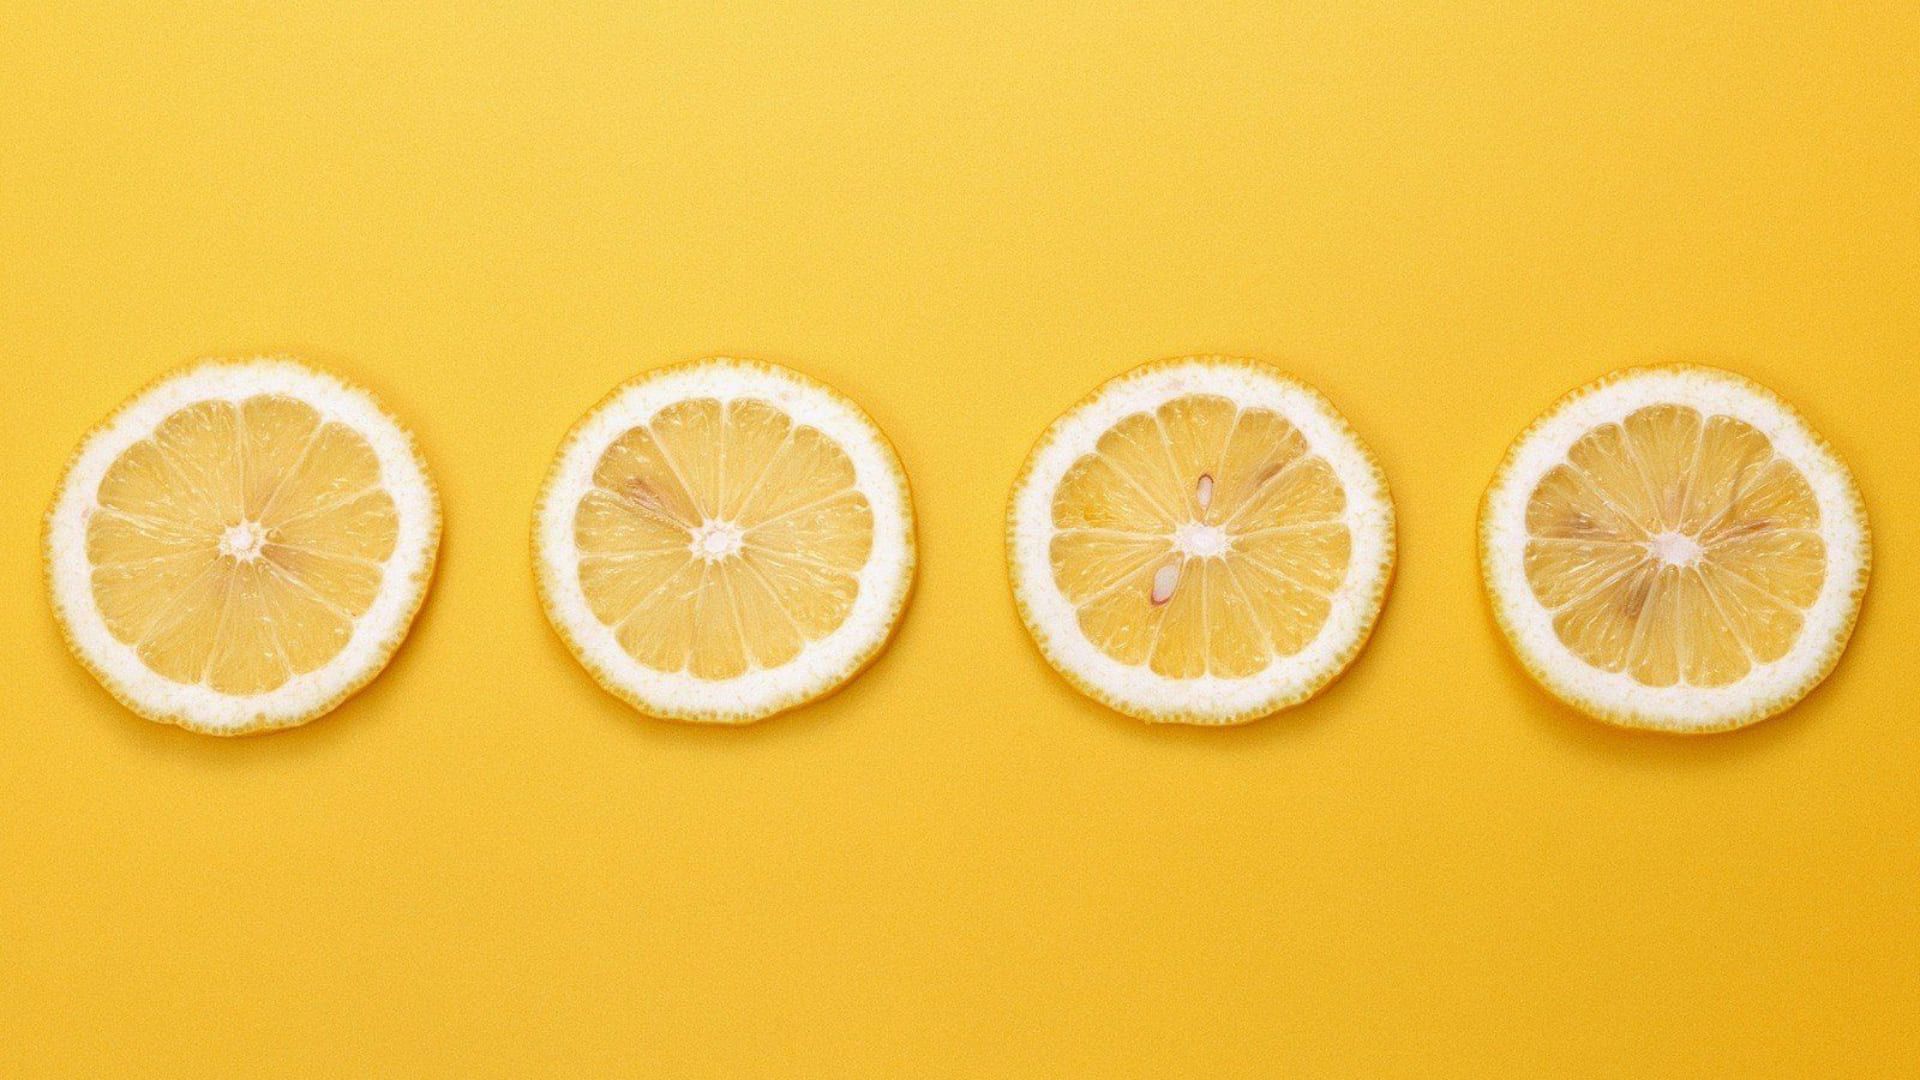 Four slices of lemon on a yellow background - Yellow